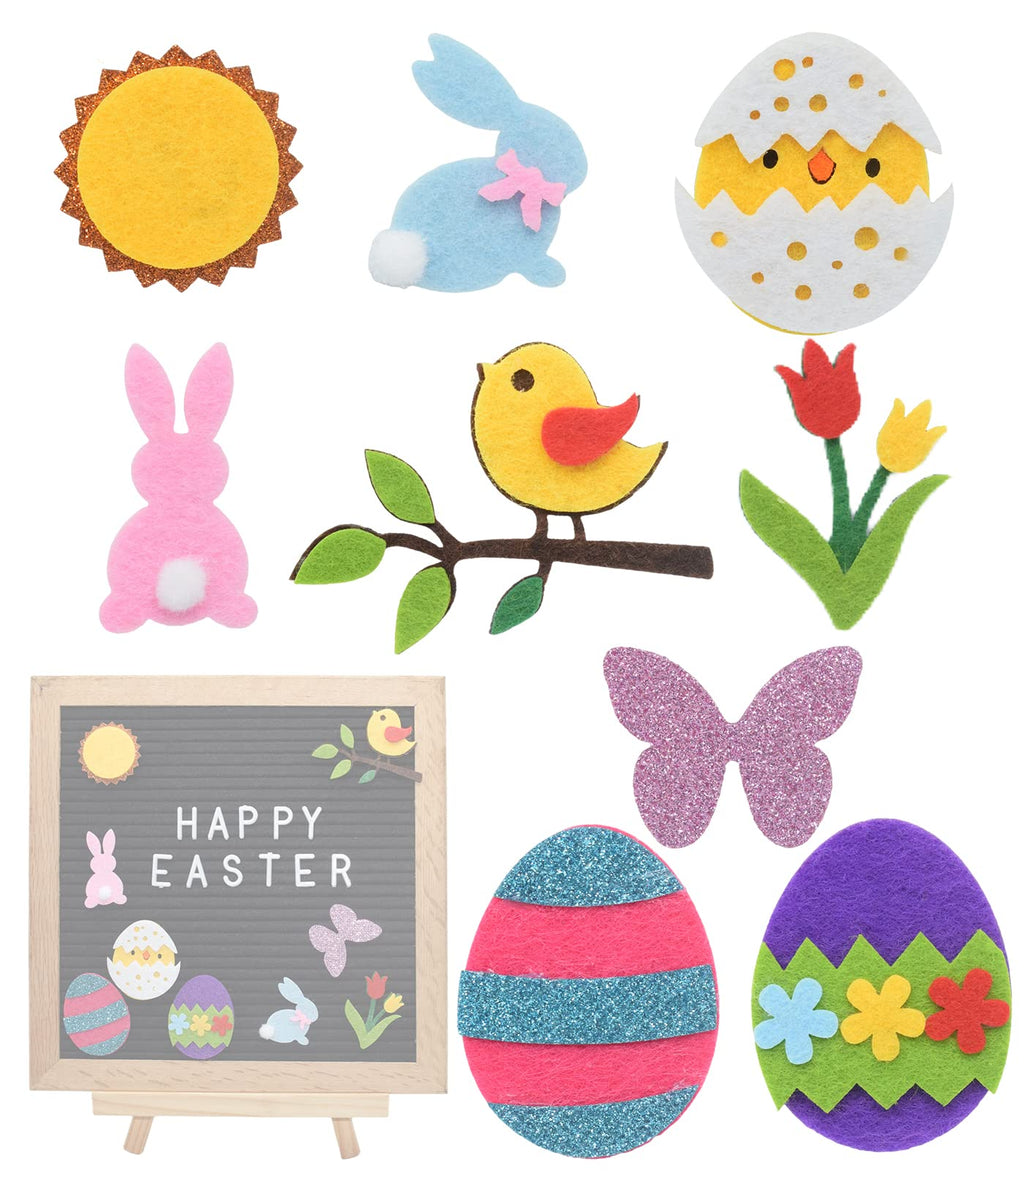  [AUSTRALIA] - 9pcs Easter Icons for Felt Letter Board Decoration Holiday Seasonal Spring Accessories for Felt Board (Board Not Included)